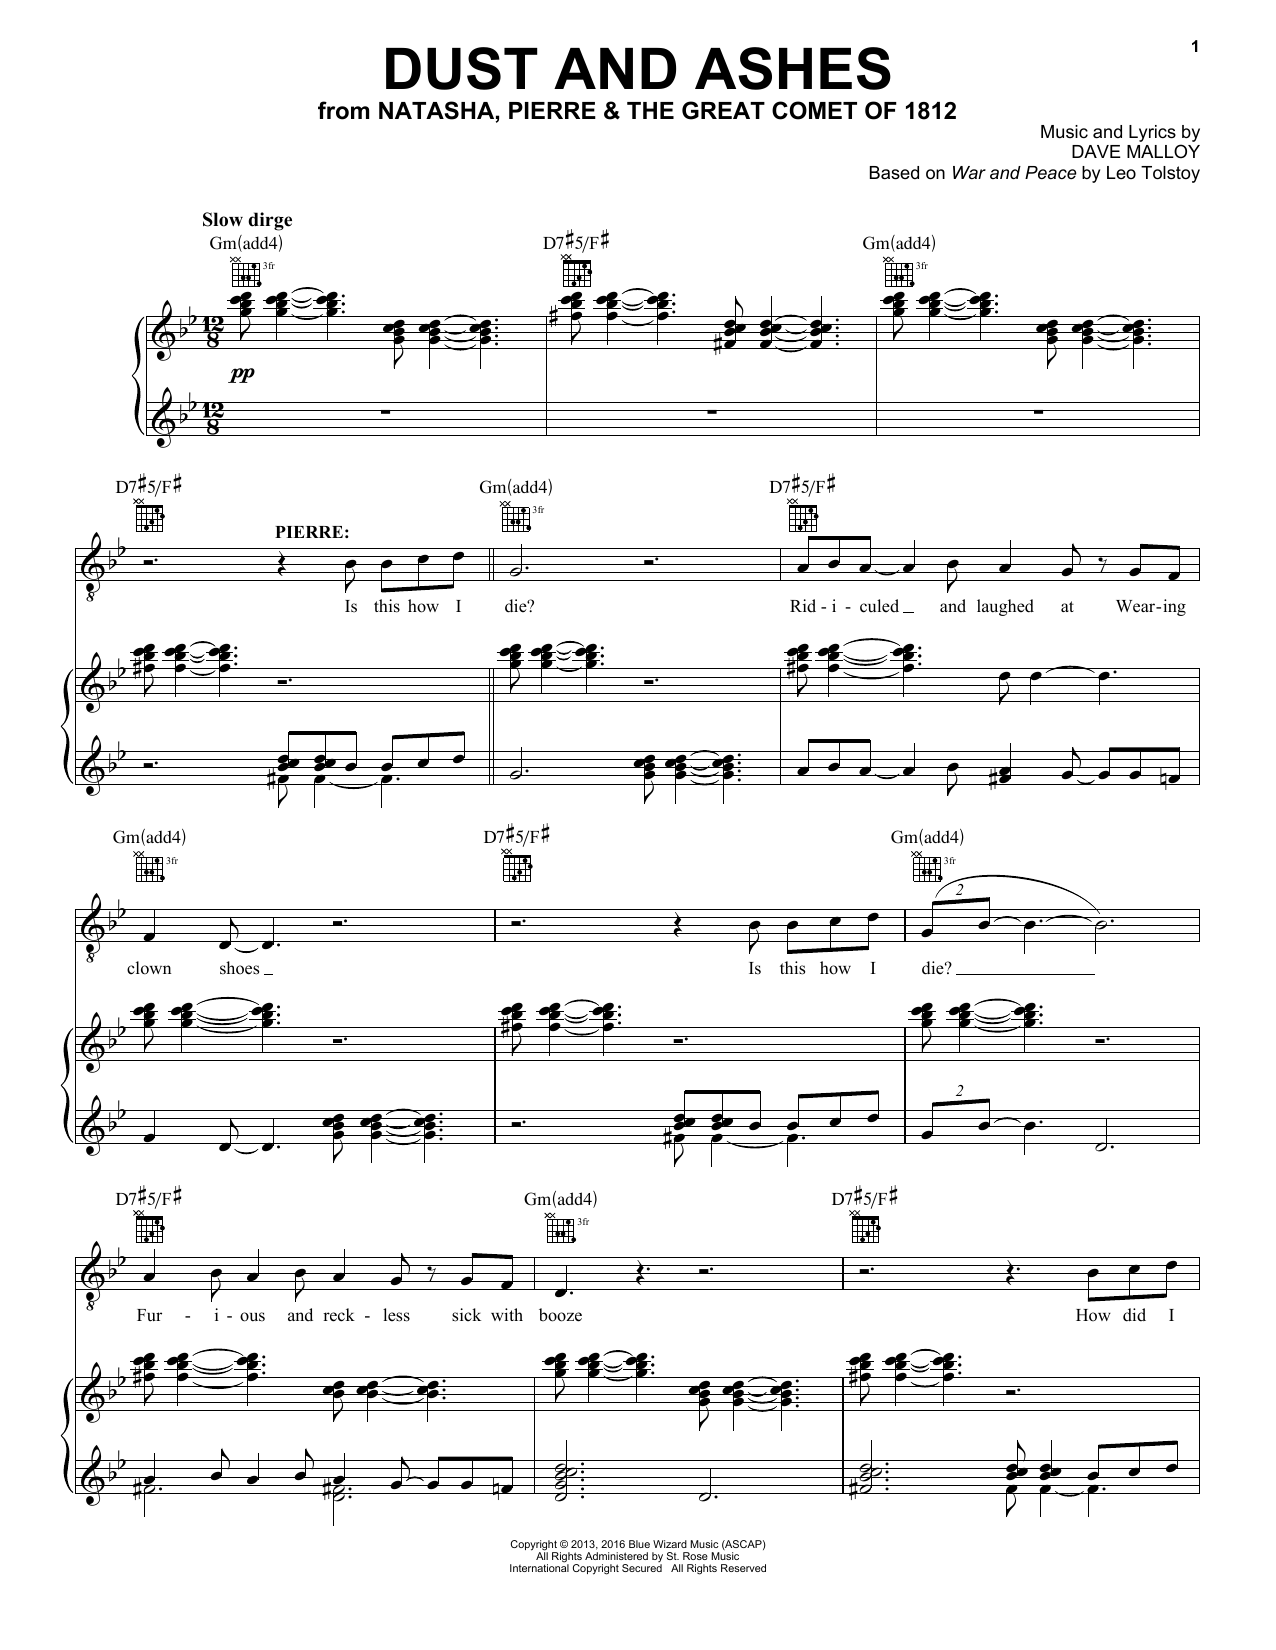 Download Dave Malloy Dust And Ashes Sheet Music